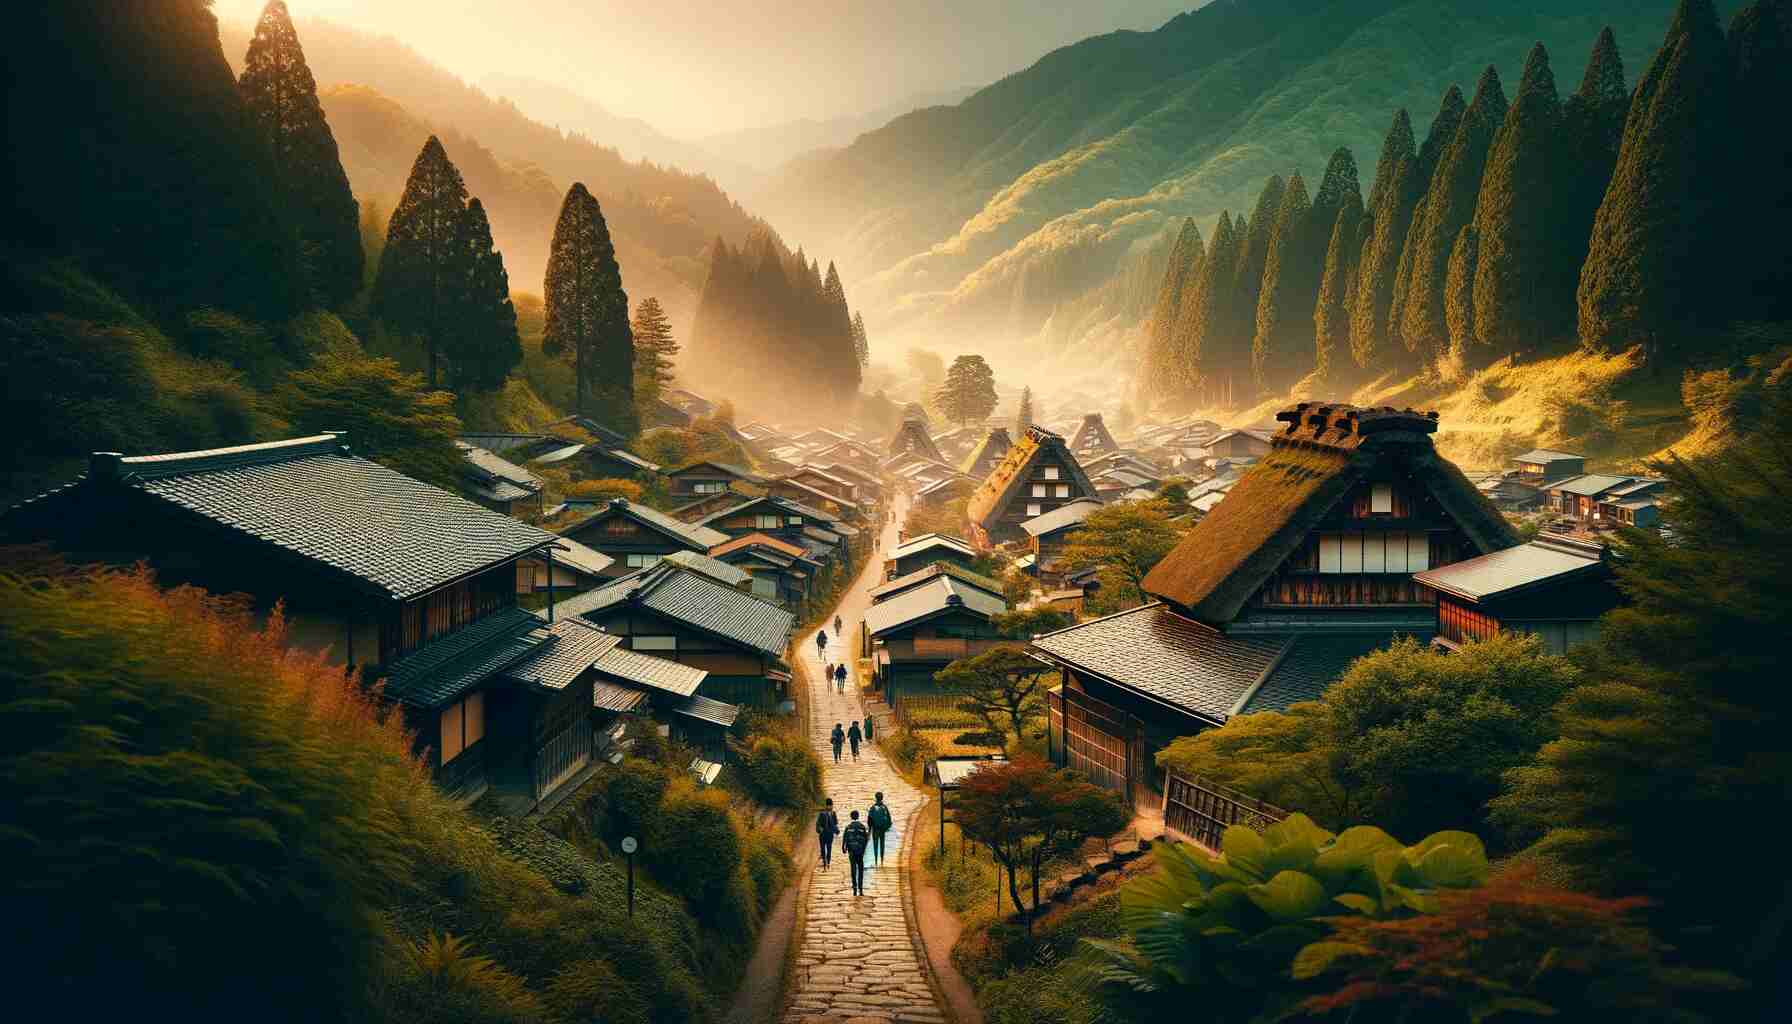 This image captures the historical and cultural essence of the Nakasendo Trail in Nagano, Japan, featuring the picturesque villages and countryside between Magome and Tsumago.